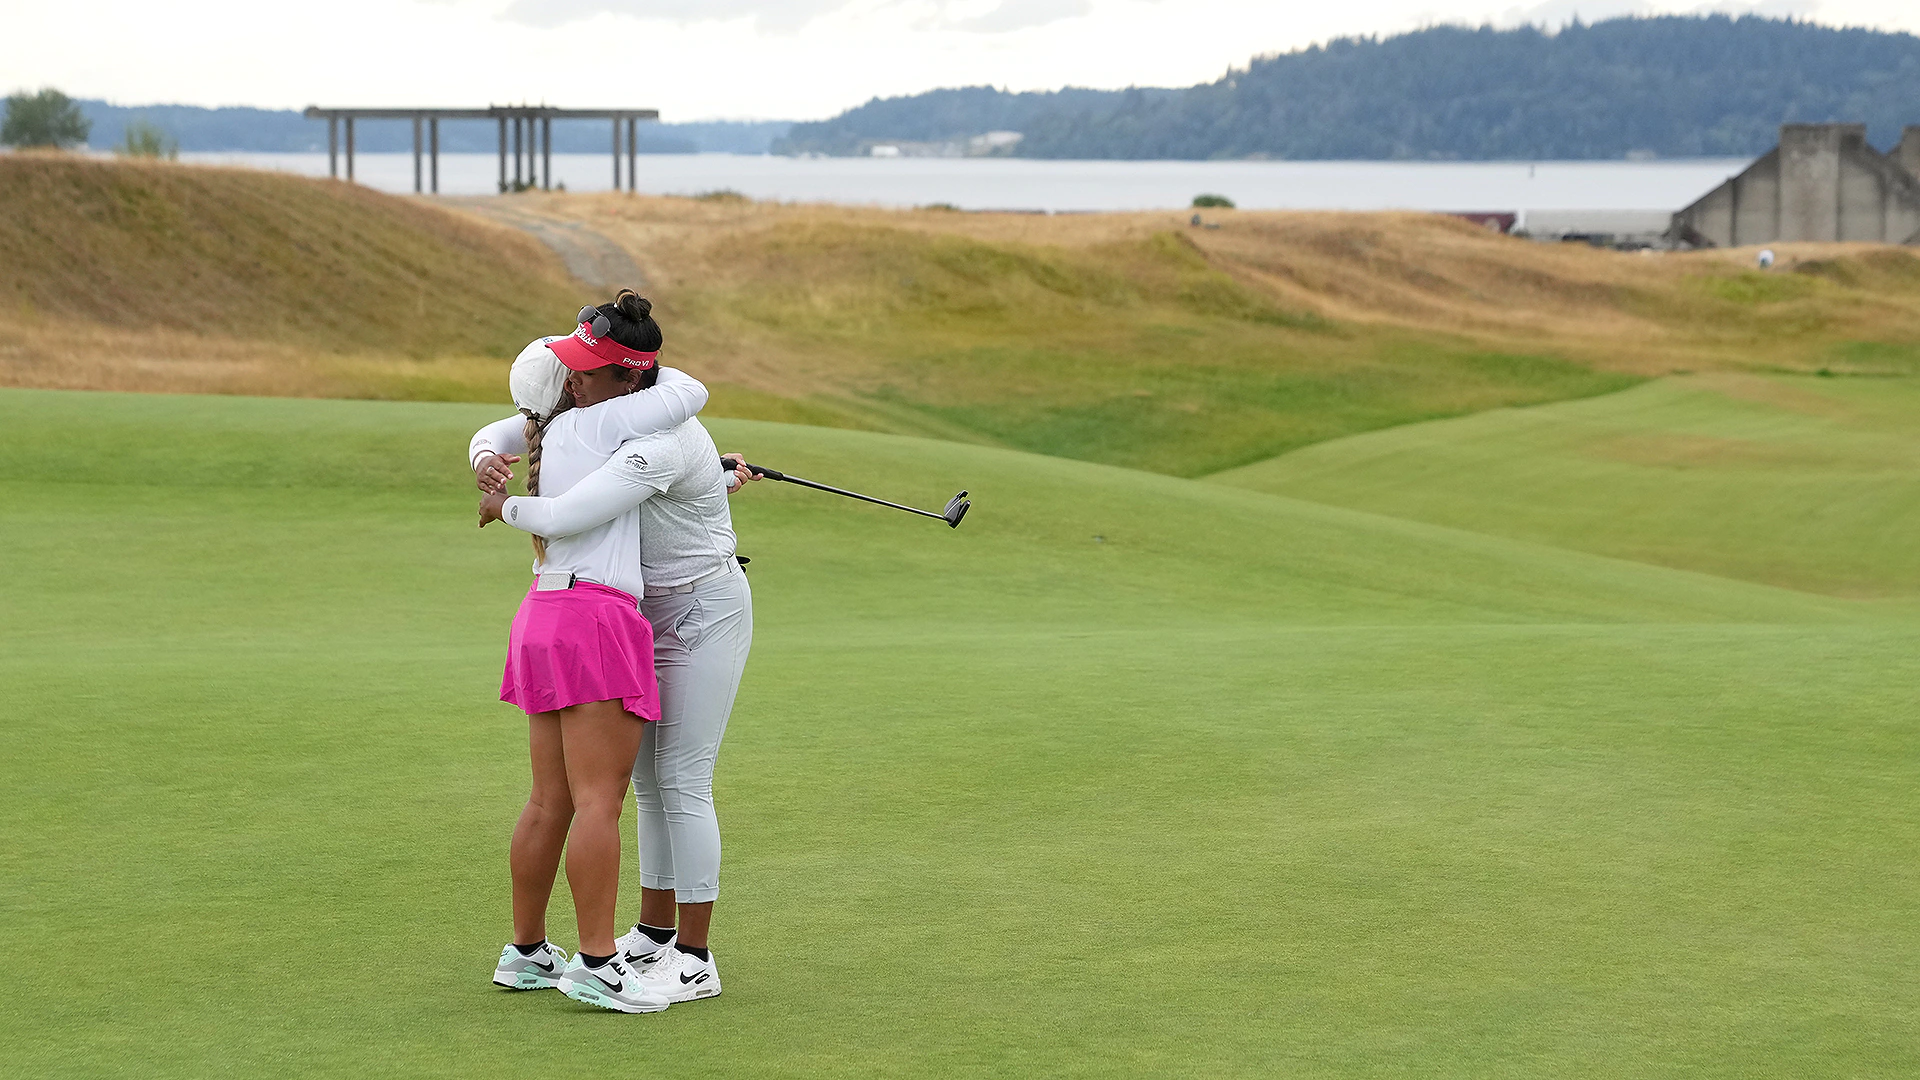 Defending champion, top seed both fall to open U.S. Women’s Am match play